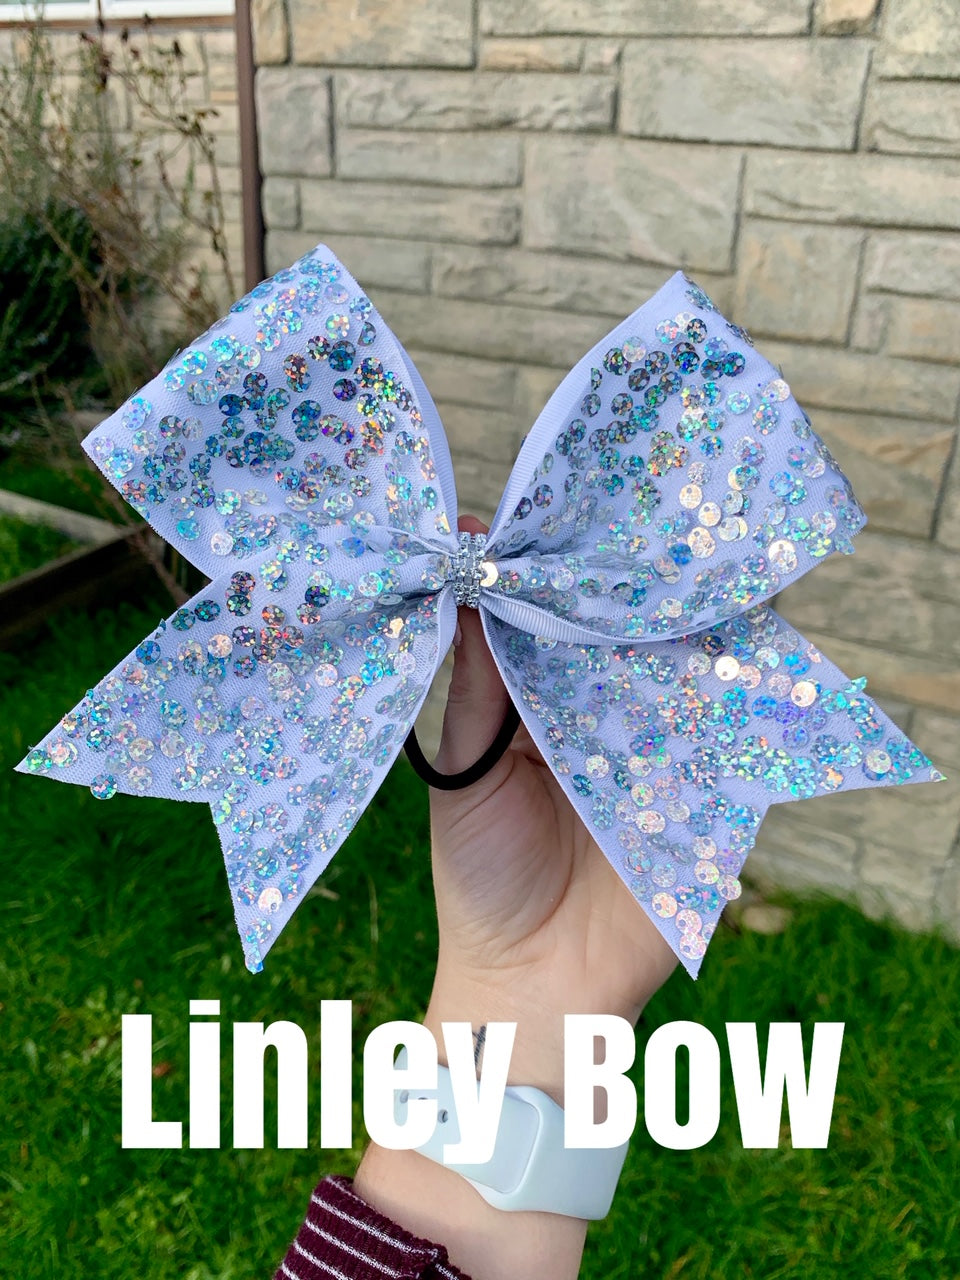 Linley Bow